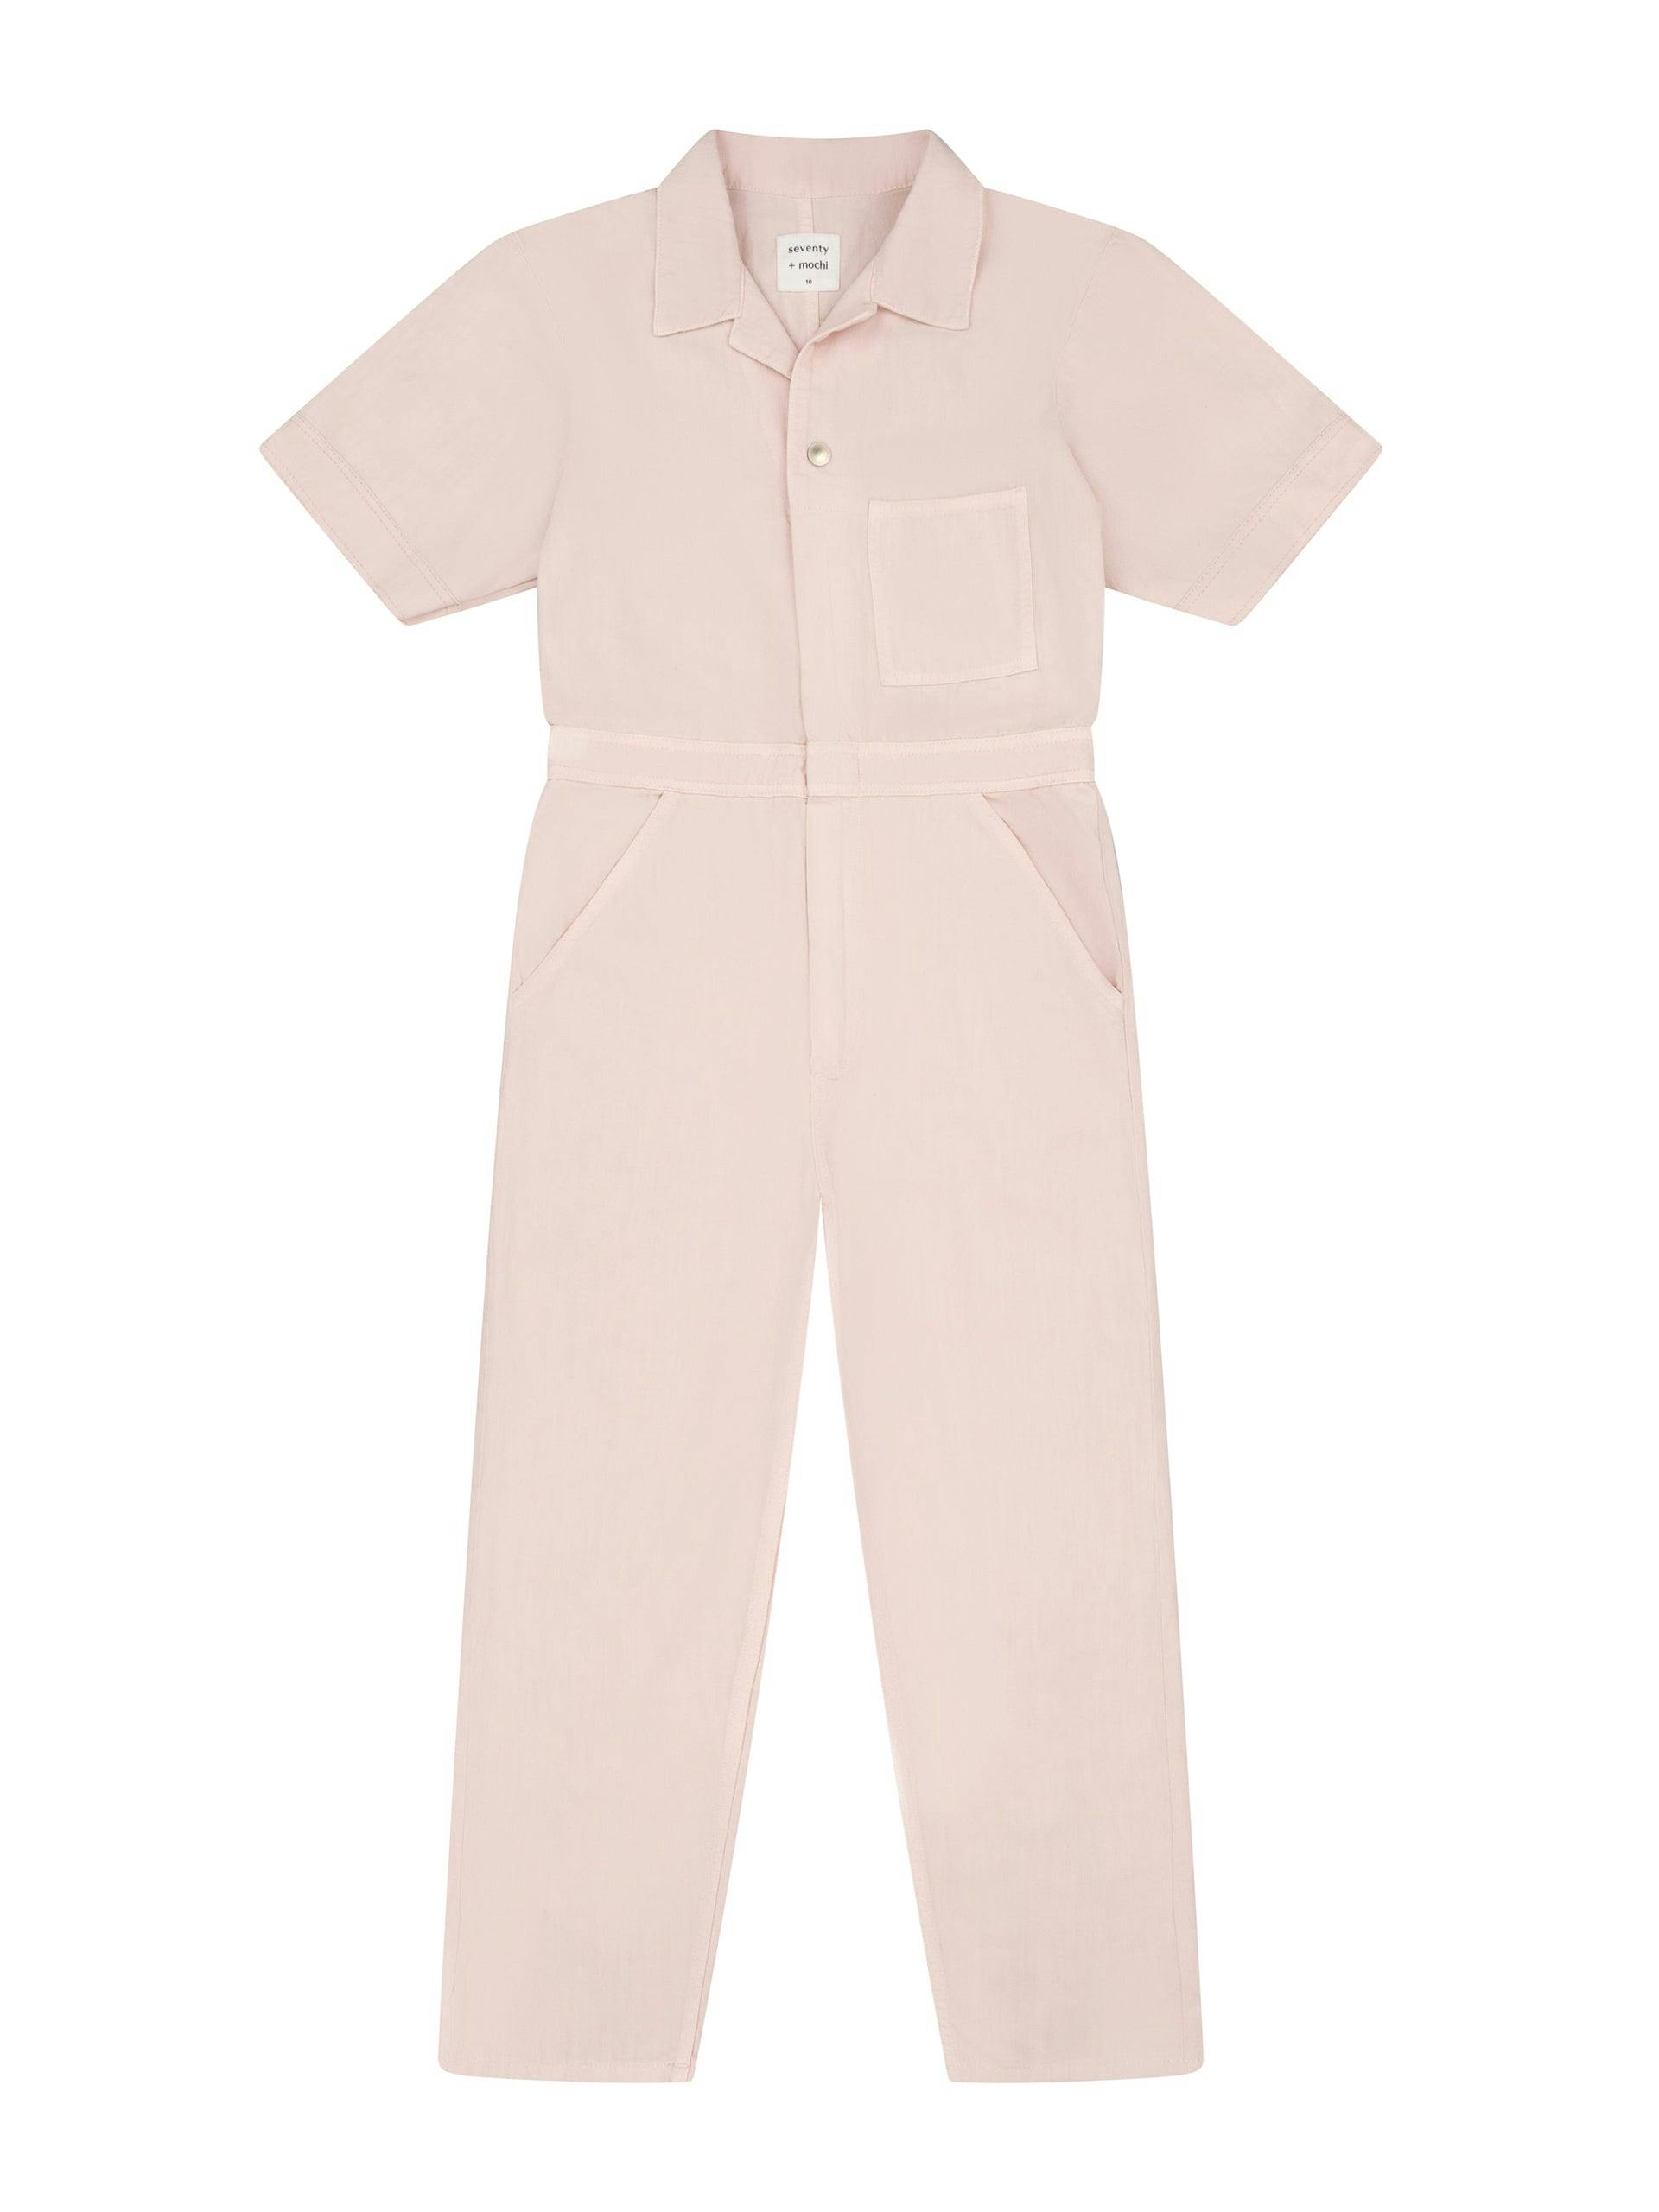 Barely pink short sleeve Indie jumpsuit